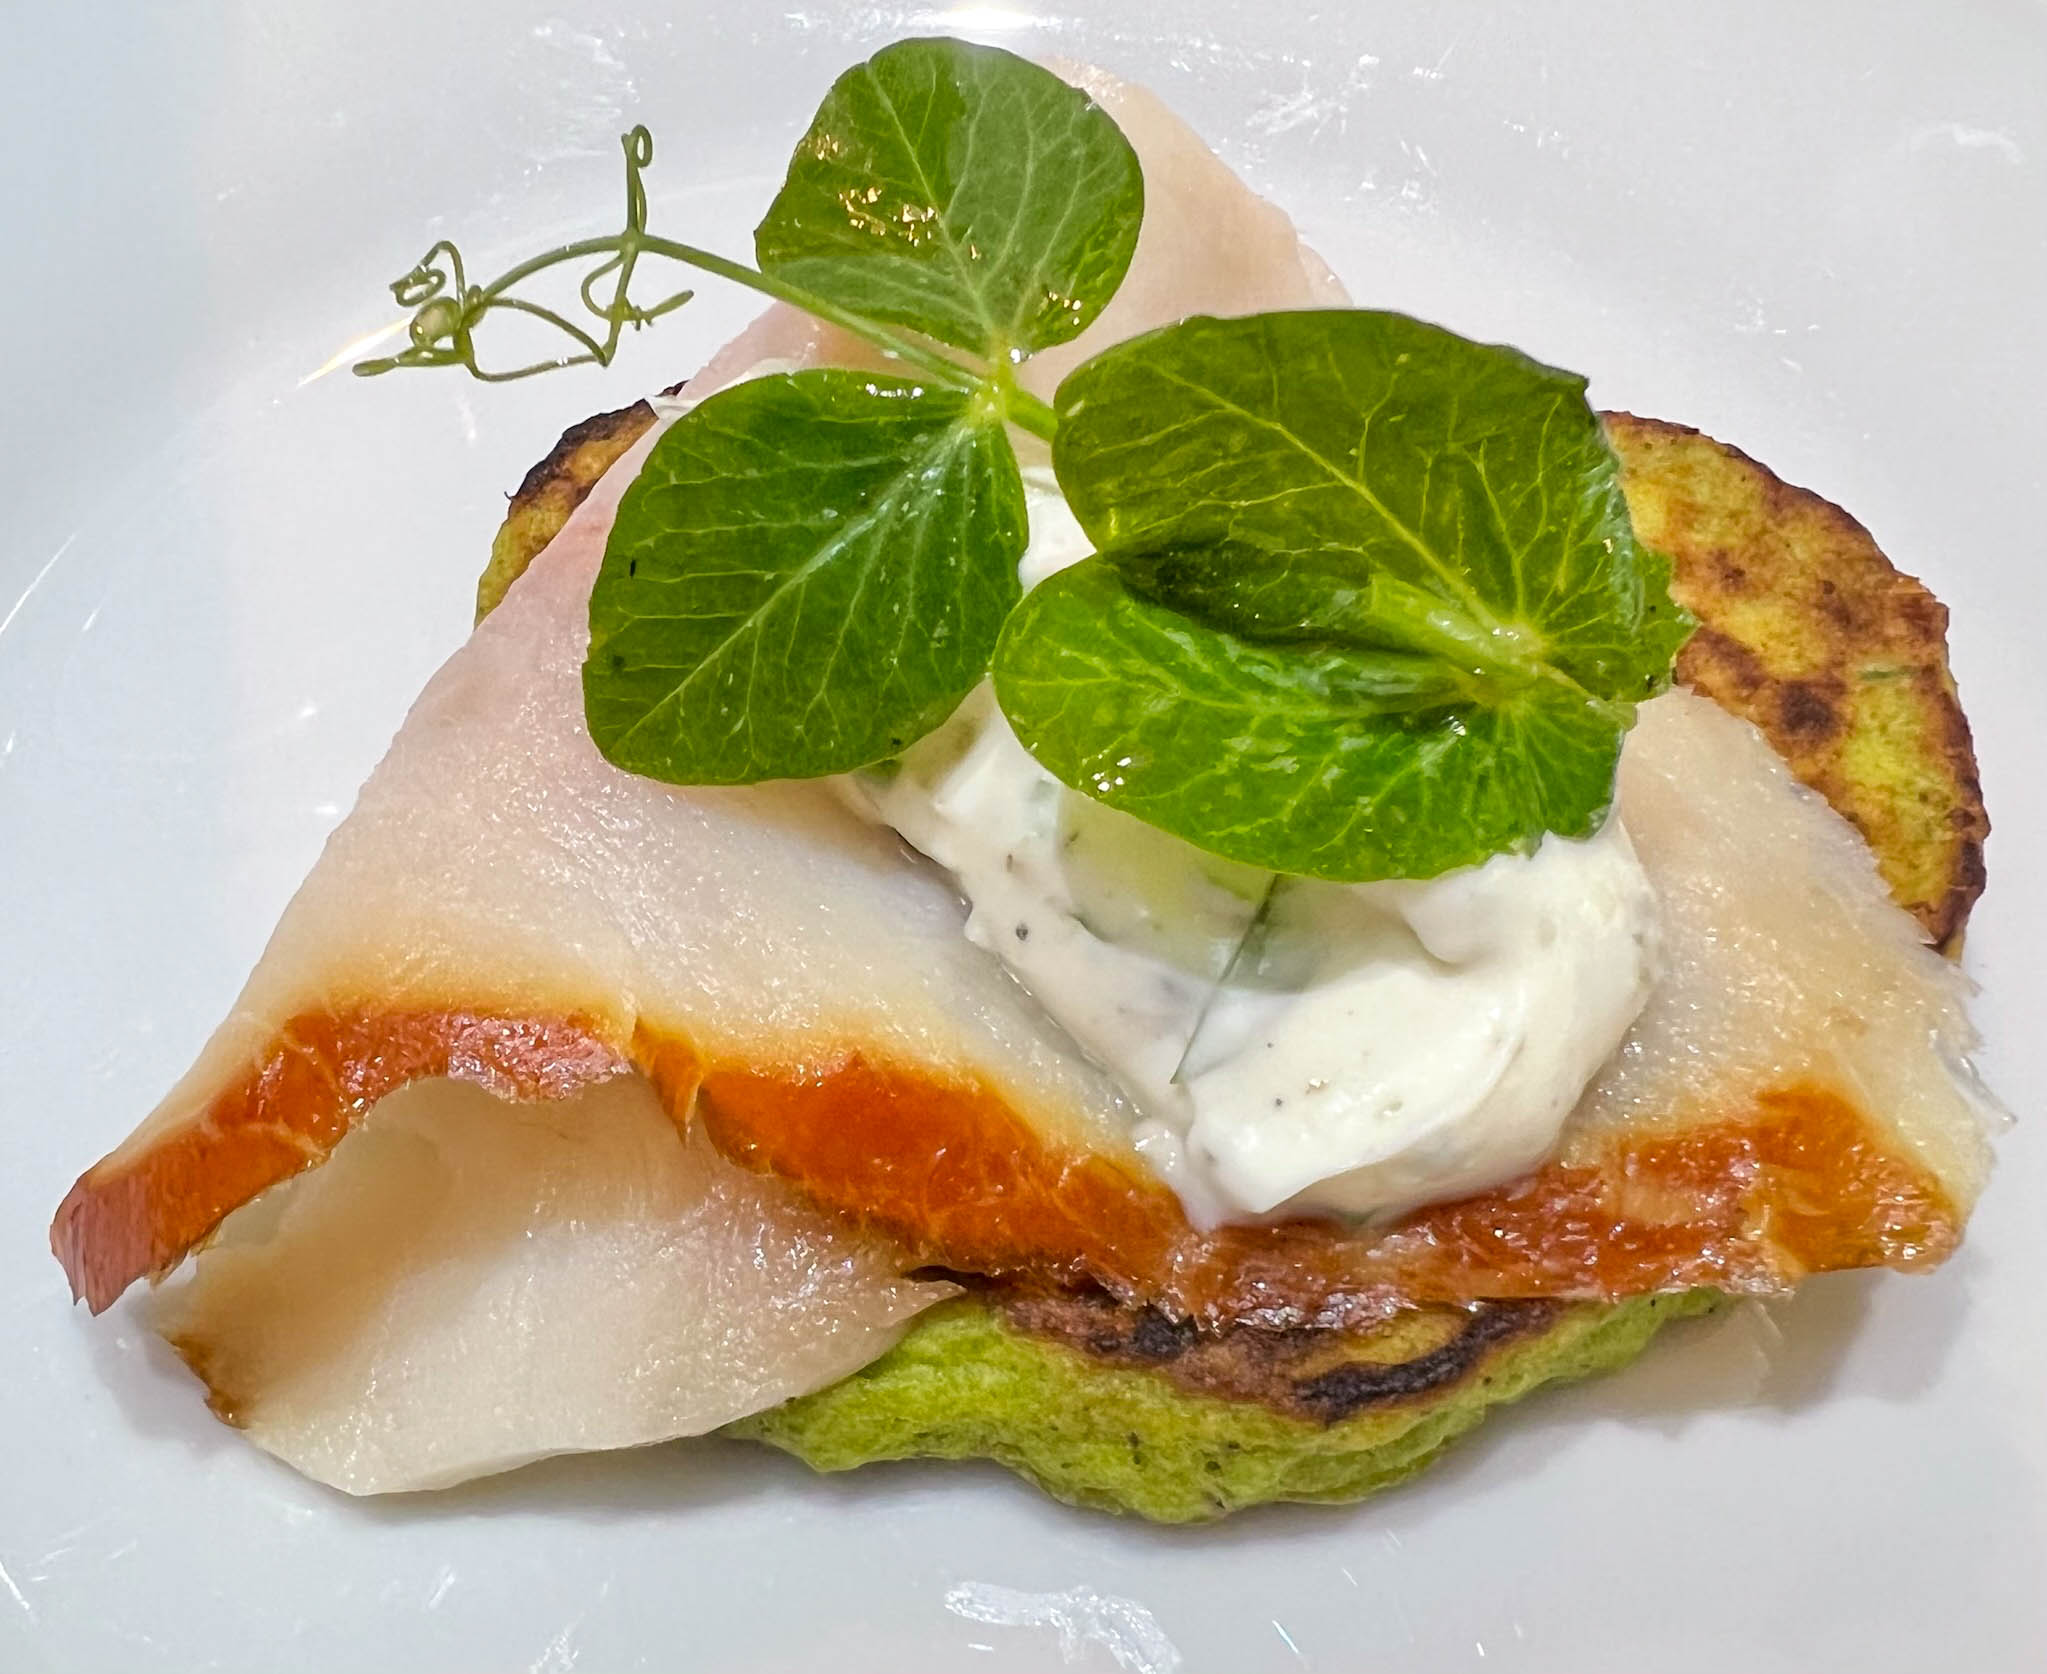 Smoked sturgeon with sweet pea pancakes, and herbed crème fraiche